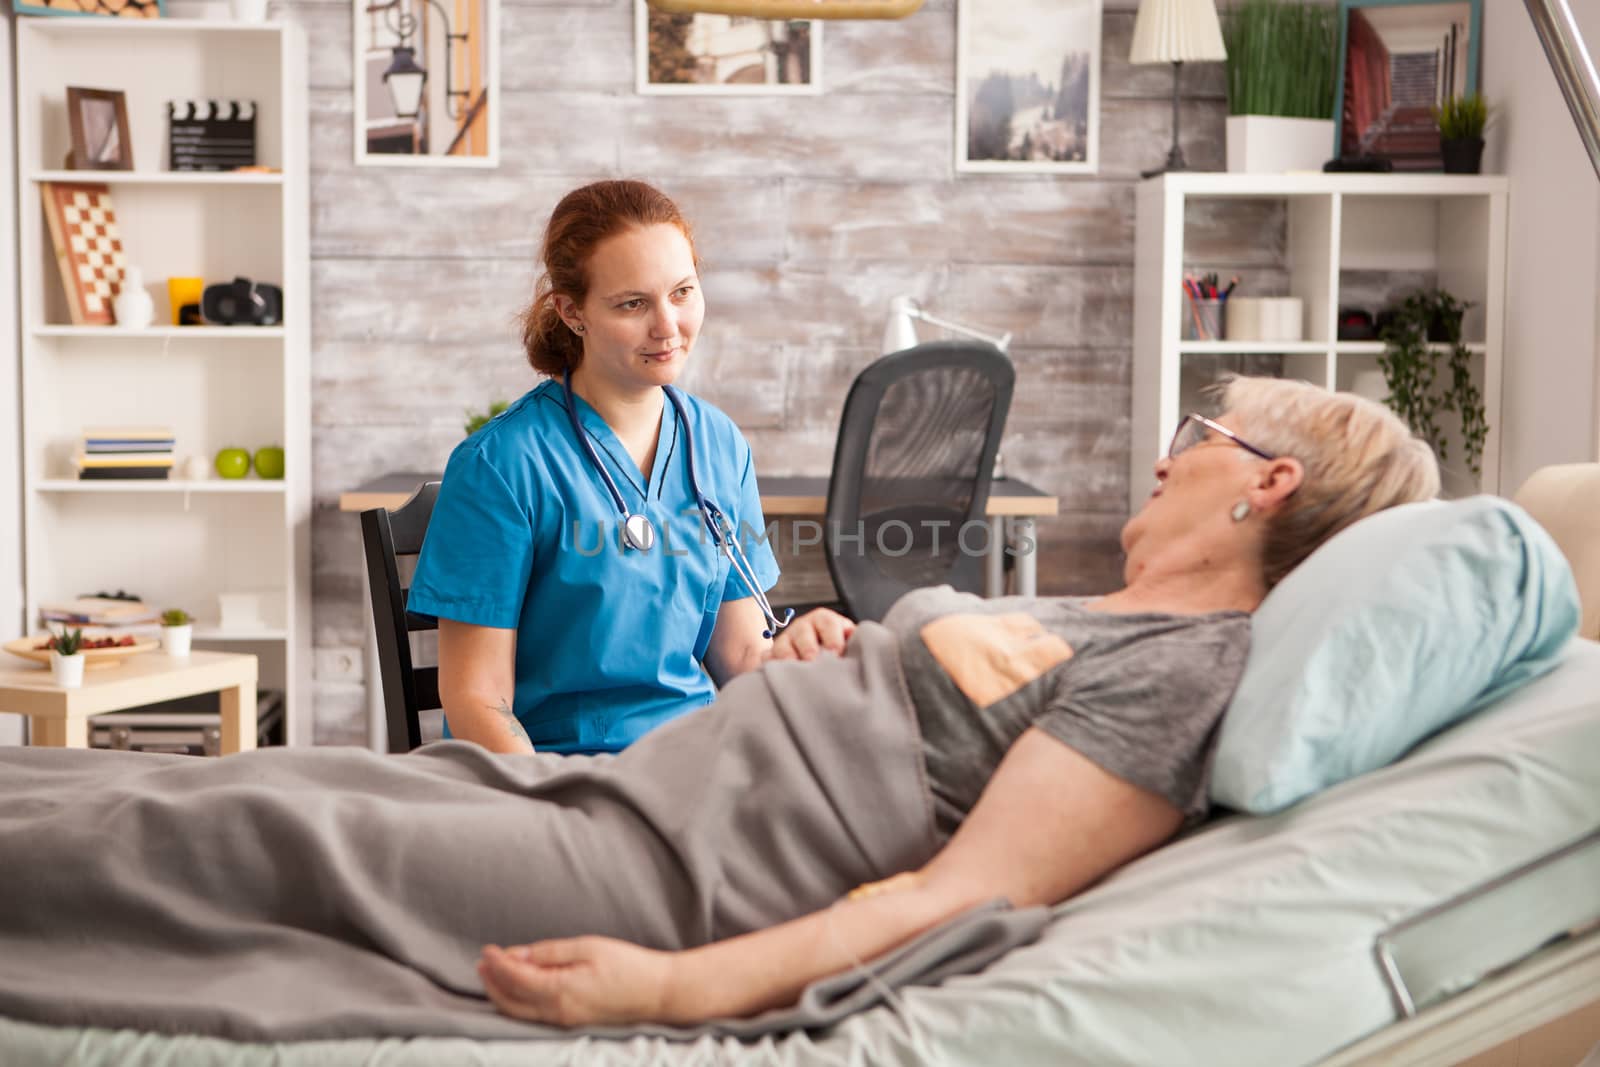 Female assistant sitting on a chair next to a sick woman in a nursing home.